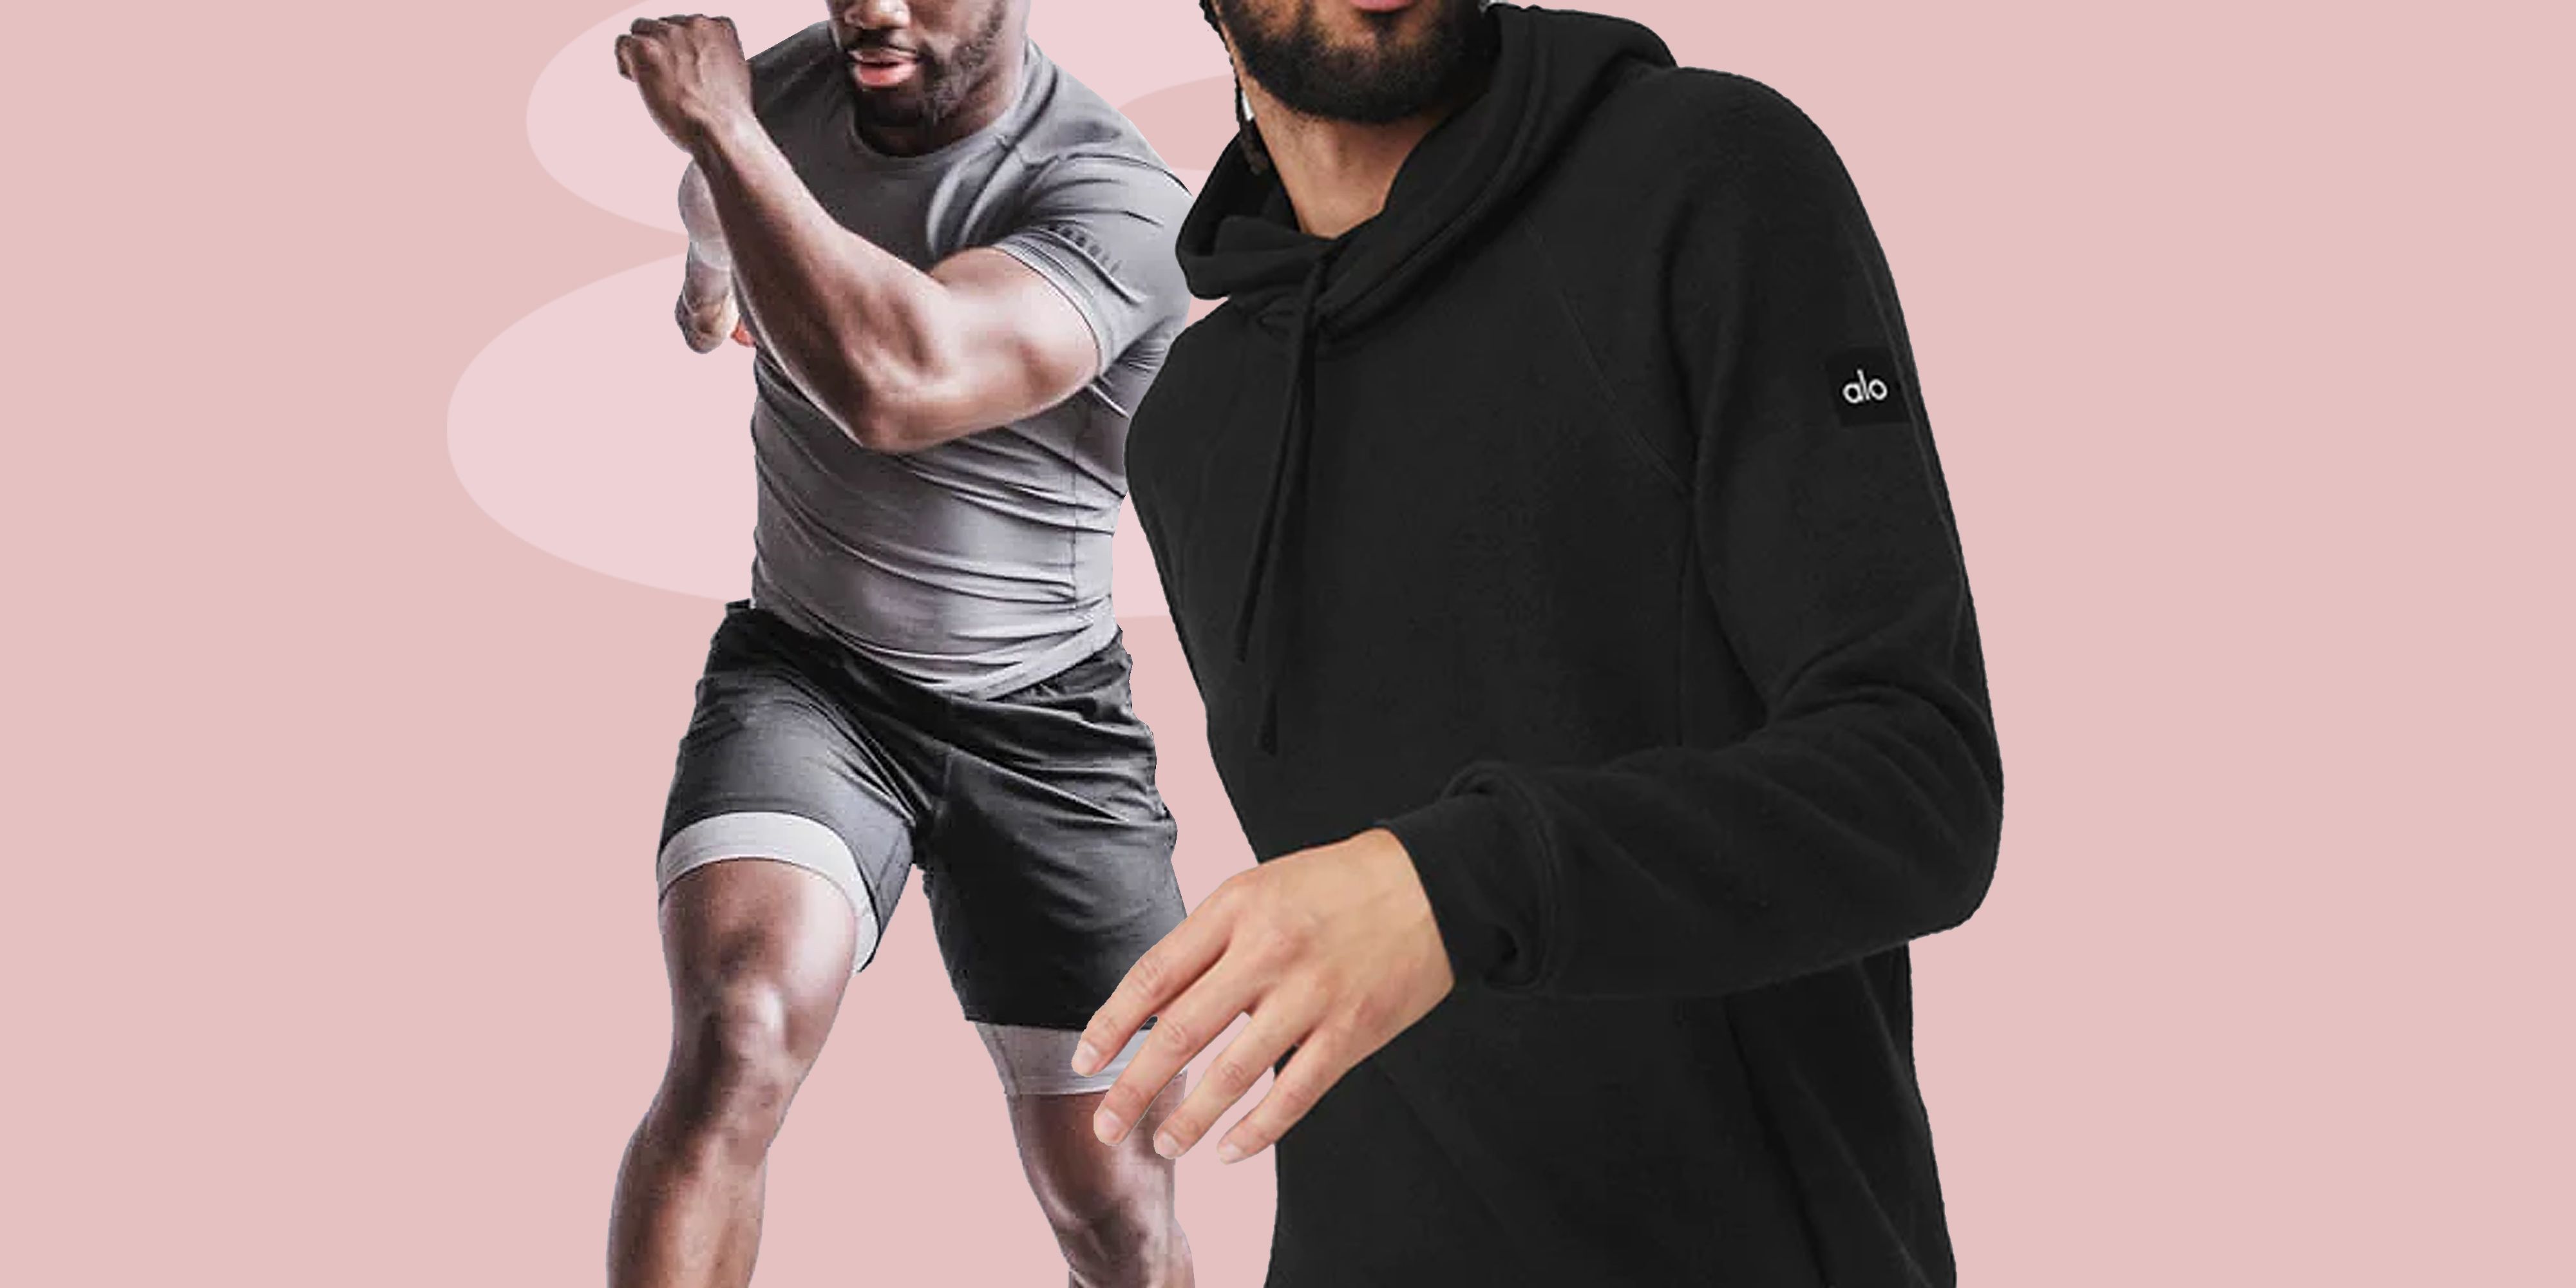 10 Fitness rs With Their Own Athletic Clothing Line Worth